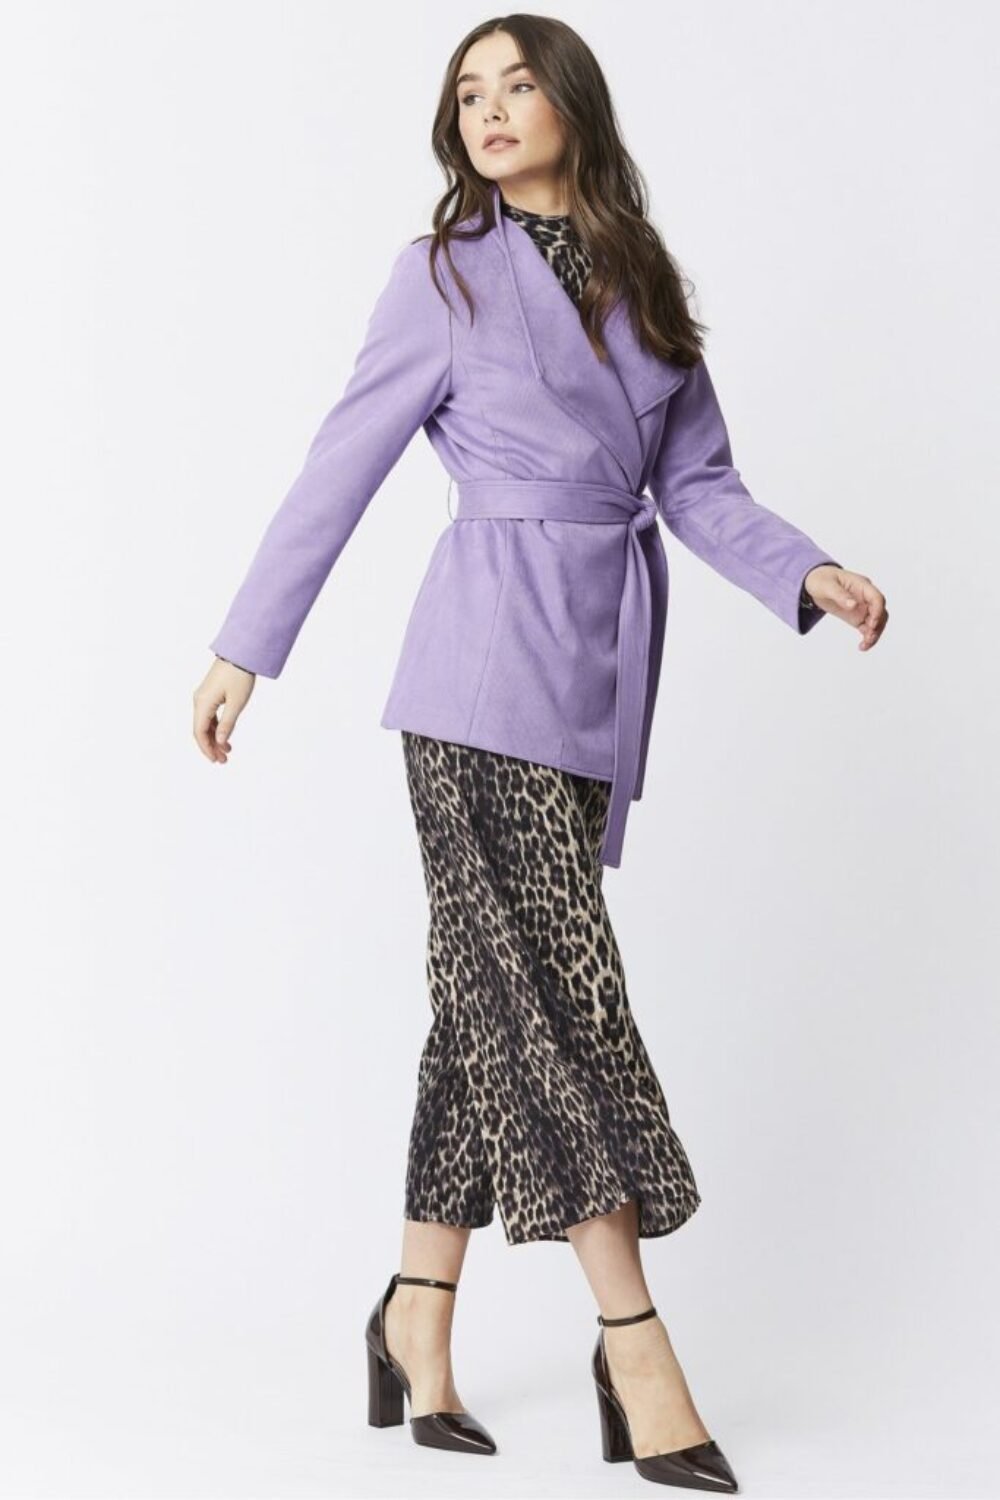 Shop Lux Purple Faux Suede Jacket Tie Waist and women's luxury and designer clothes at www.lux-apparel.co.uk